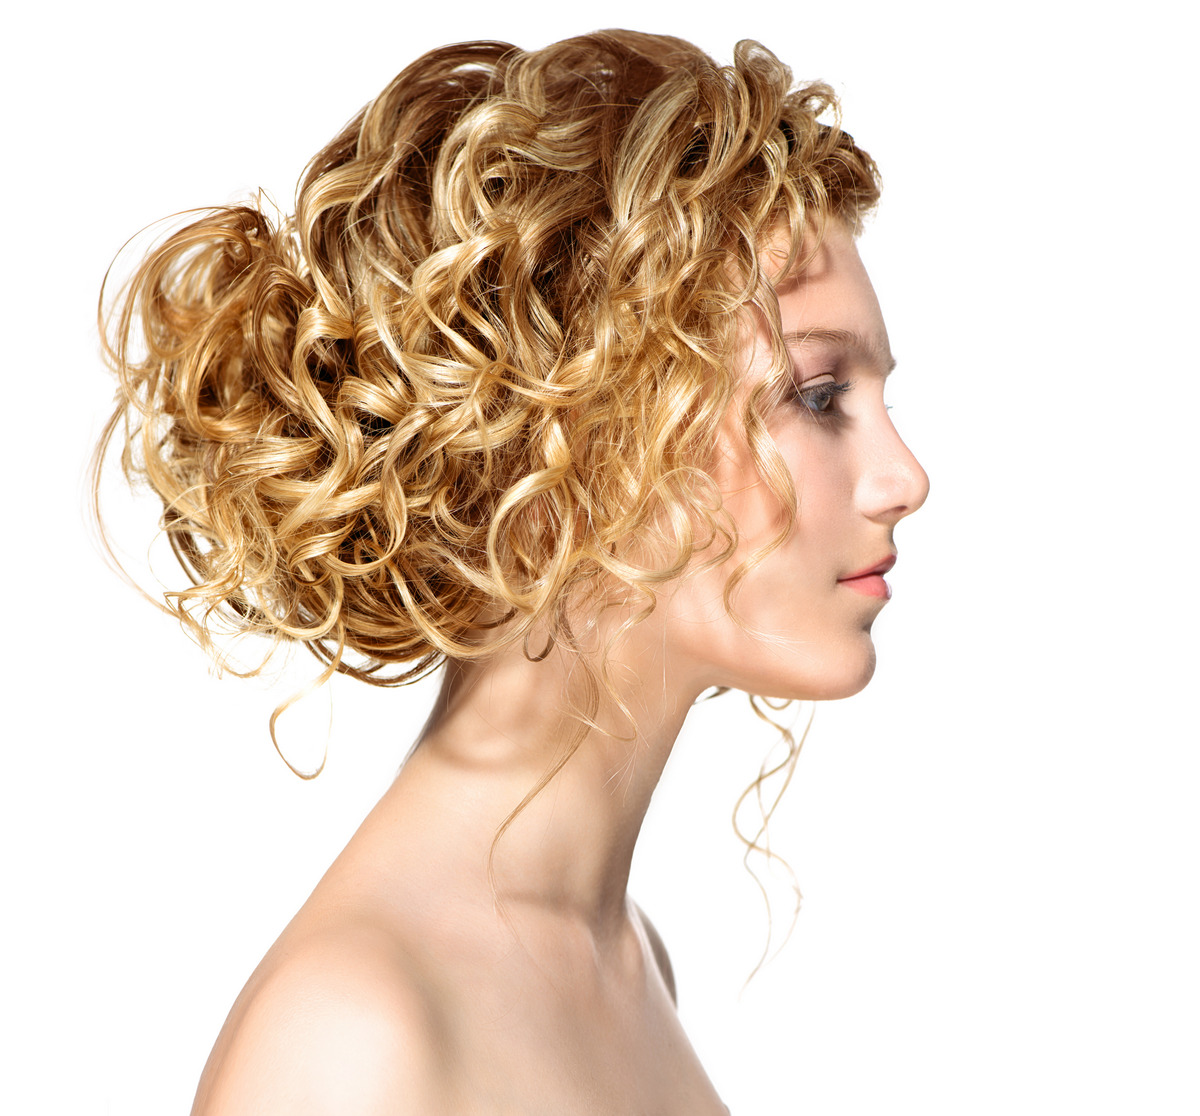 Blonde Curly Loose Updo